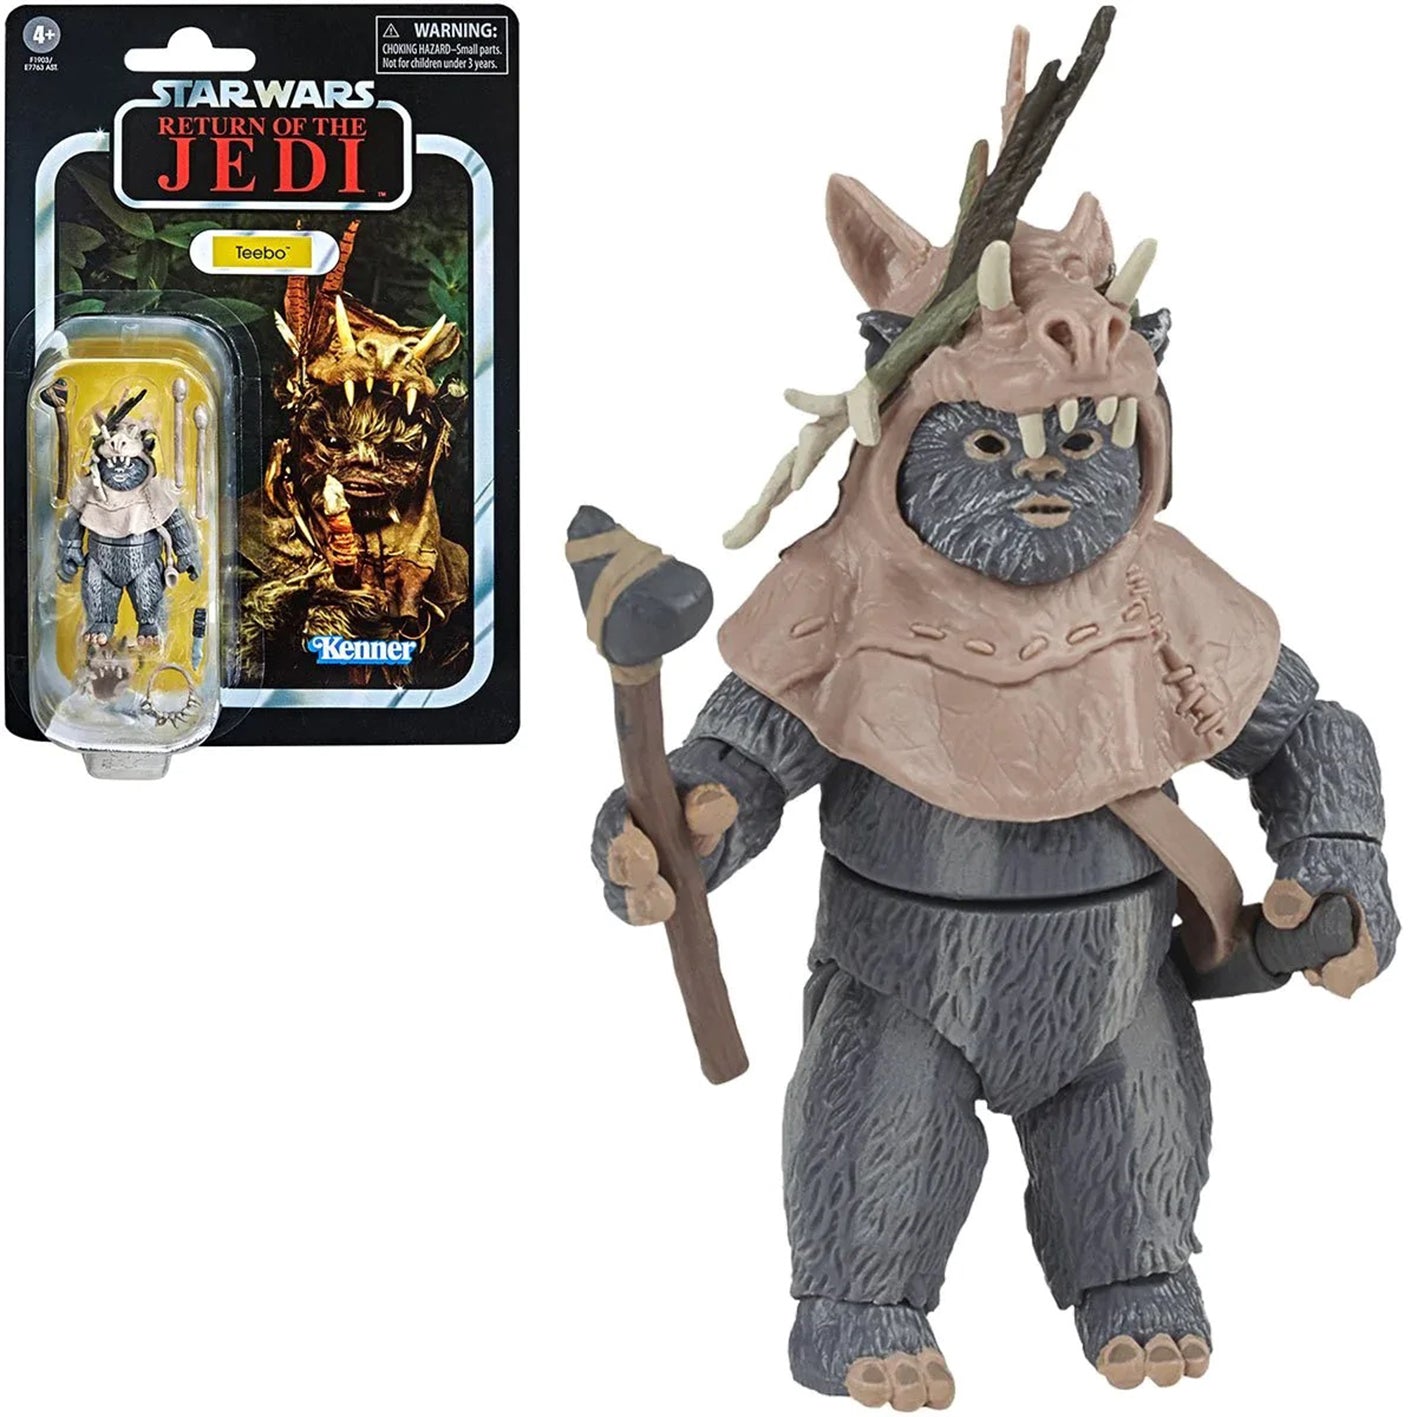 Teebo, Star Wars: The Vintage Collection